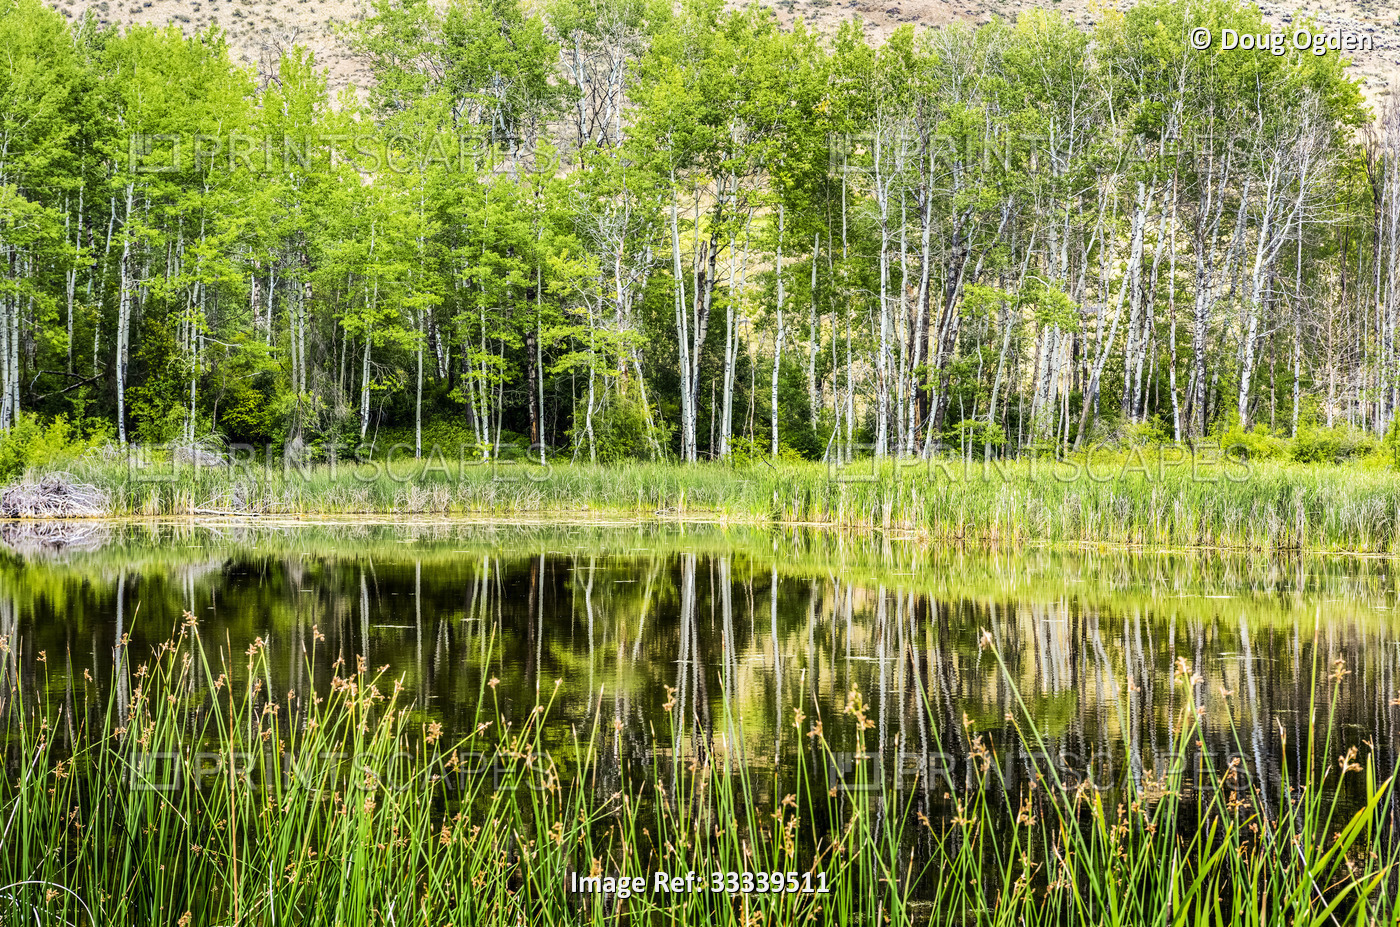 Reflections of birch trees on a calm pond near the town of Winthrip in Eastern ...